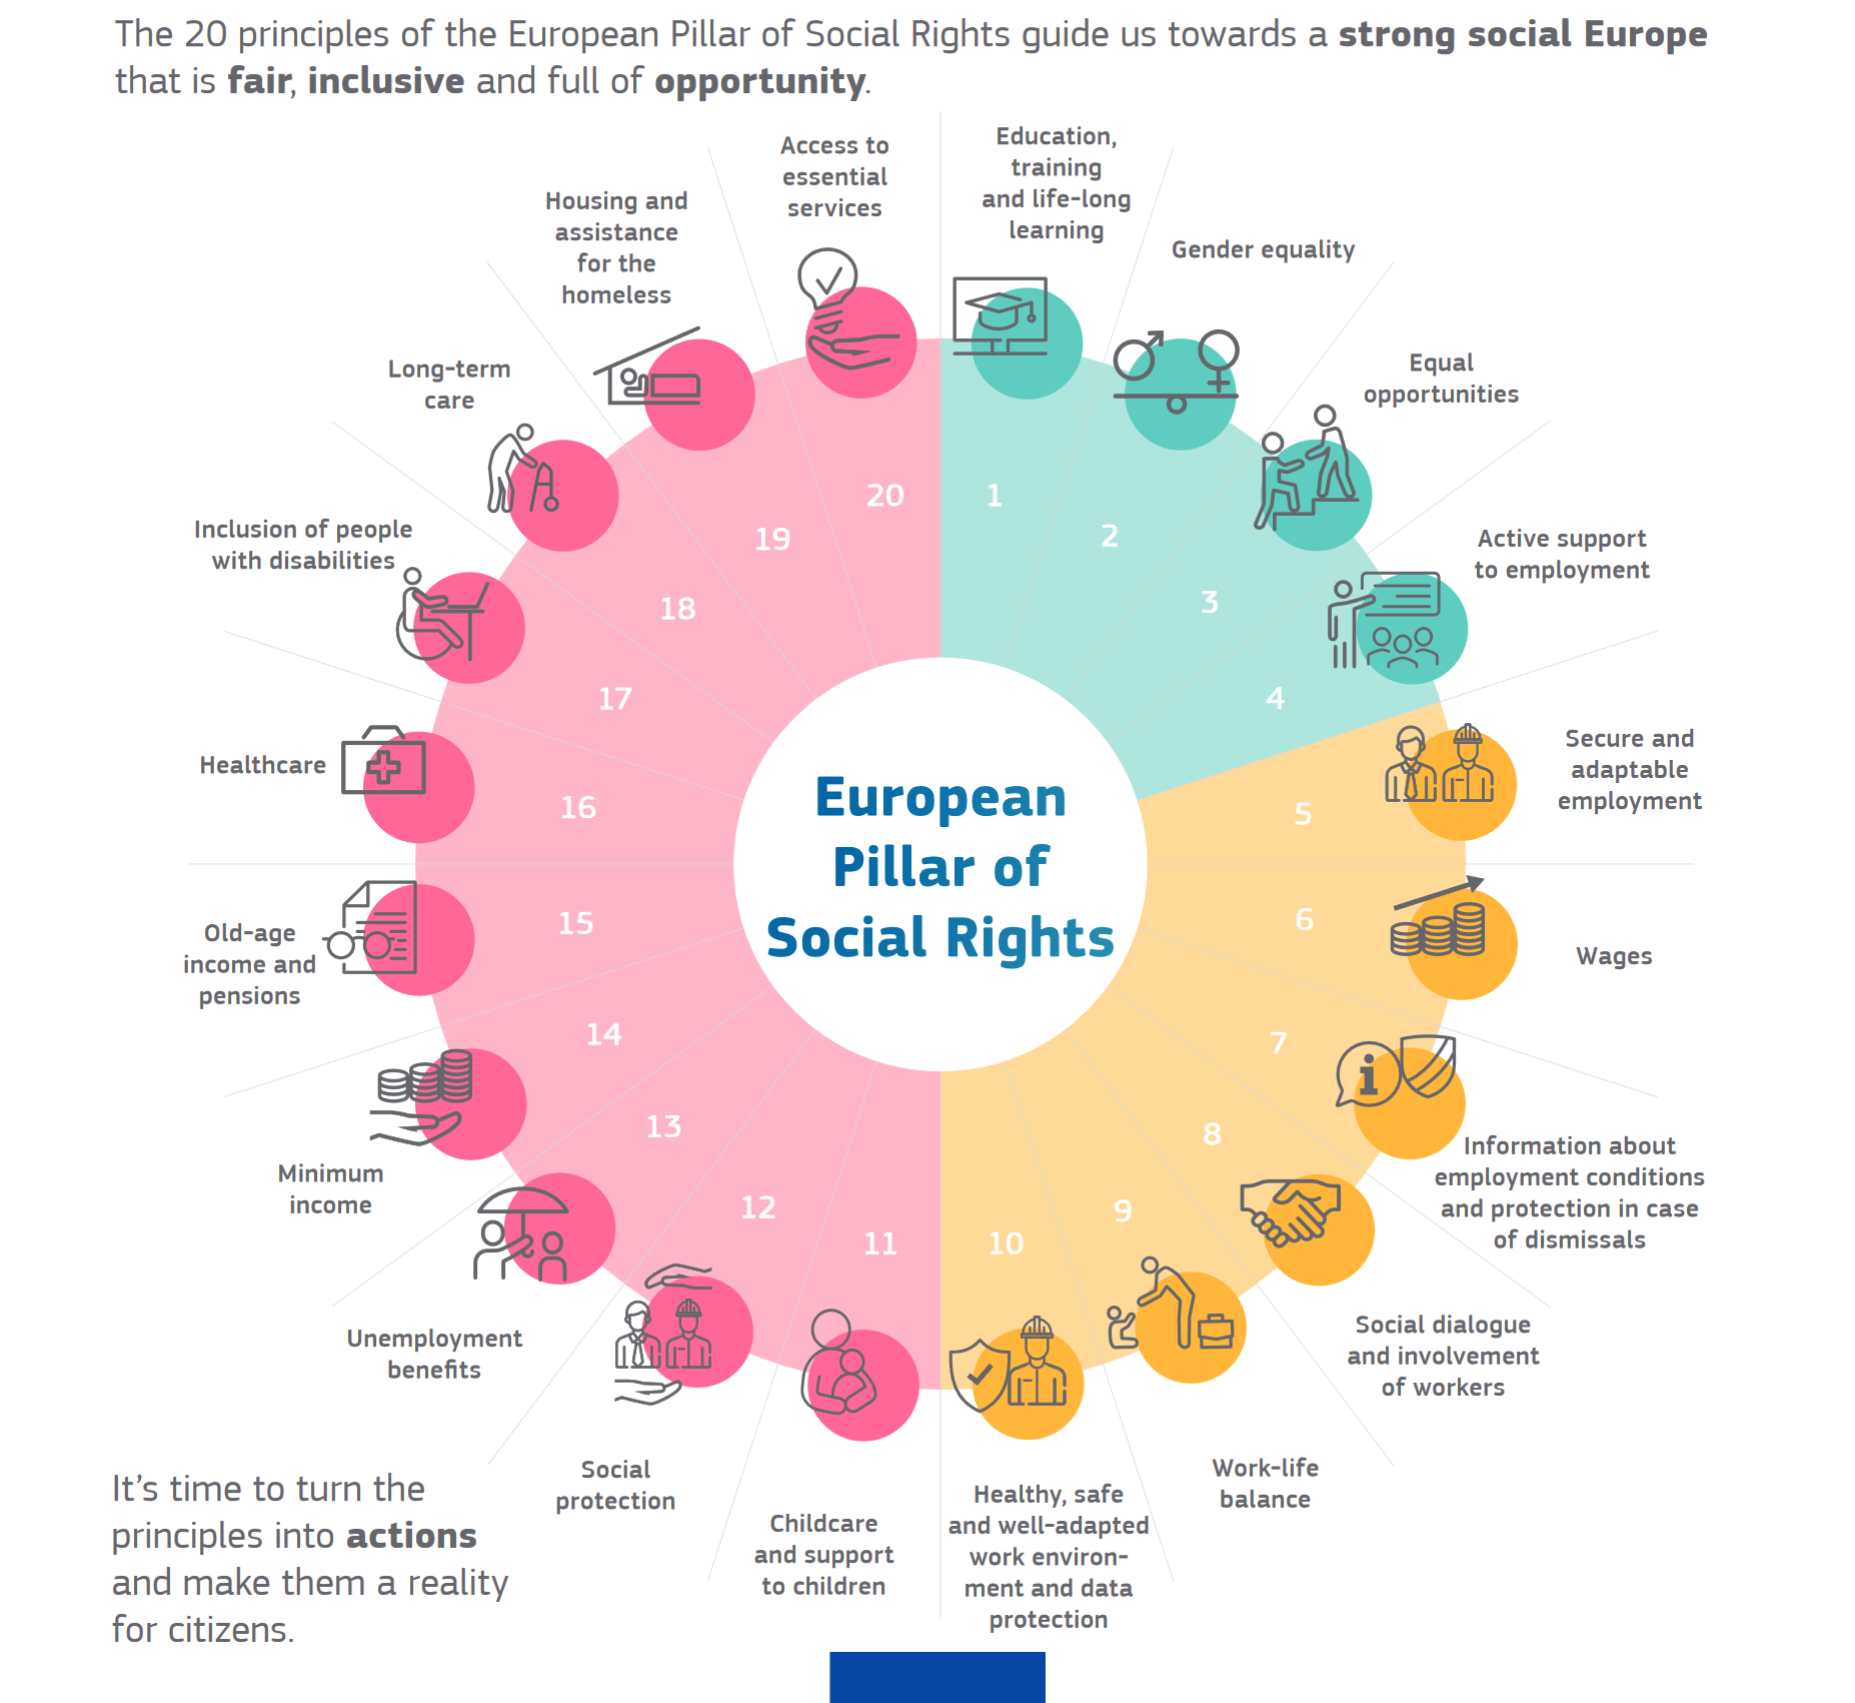 The European Pillar of Social Rights: turning principles into actions .